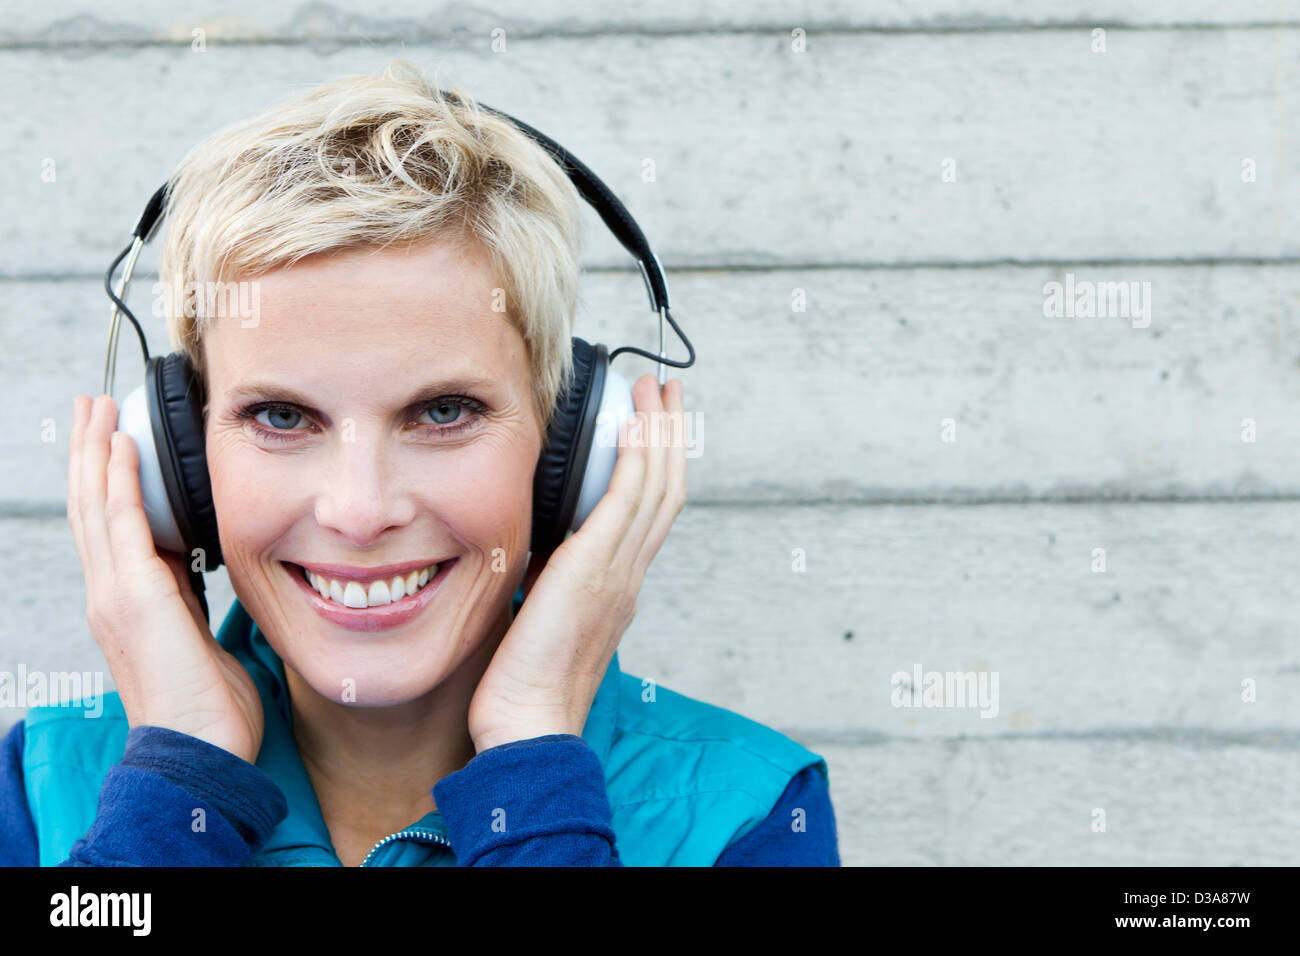 Smiling woman listening to headphones Banque D'Images